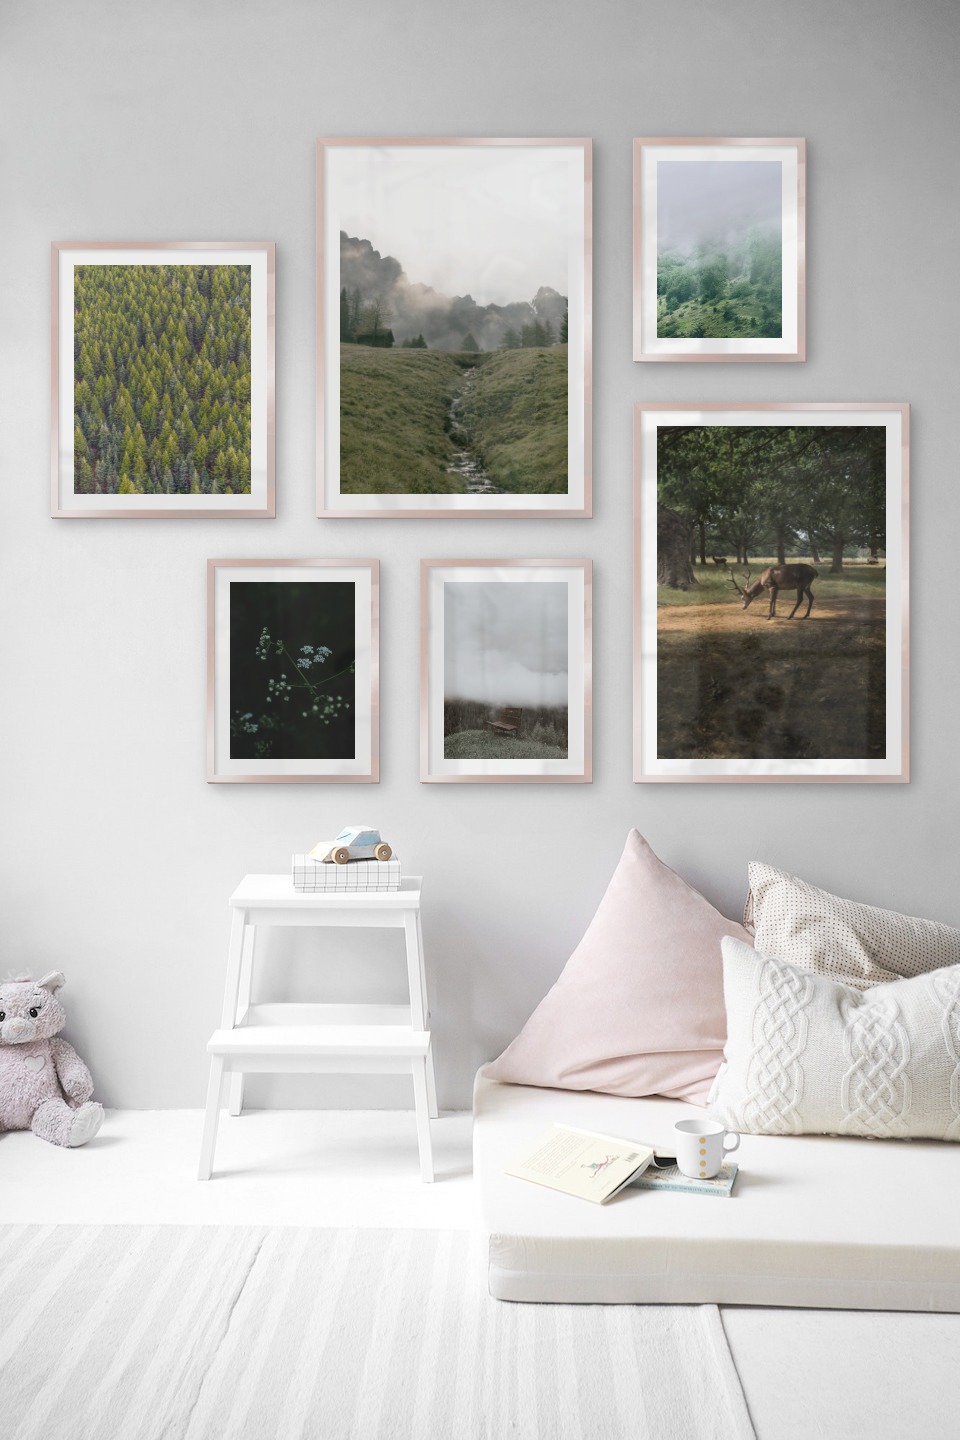 Gallery wall with picture frames in copper in sizes 40x50, 50x70 and 30x40 with prints "Trees from above", "Green valley in front of mountains", "Green plant", "Bench in misty nature", "Deer in forest" and "Slope with trees"